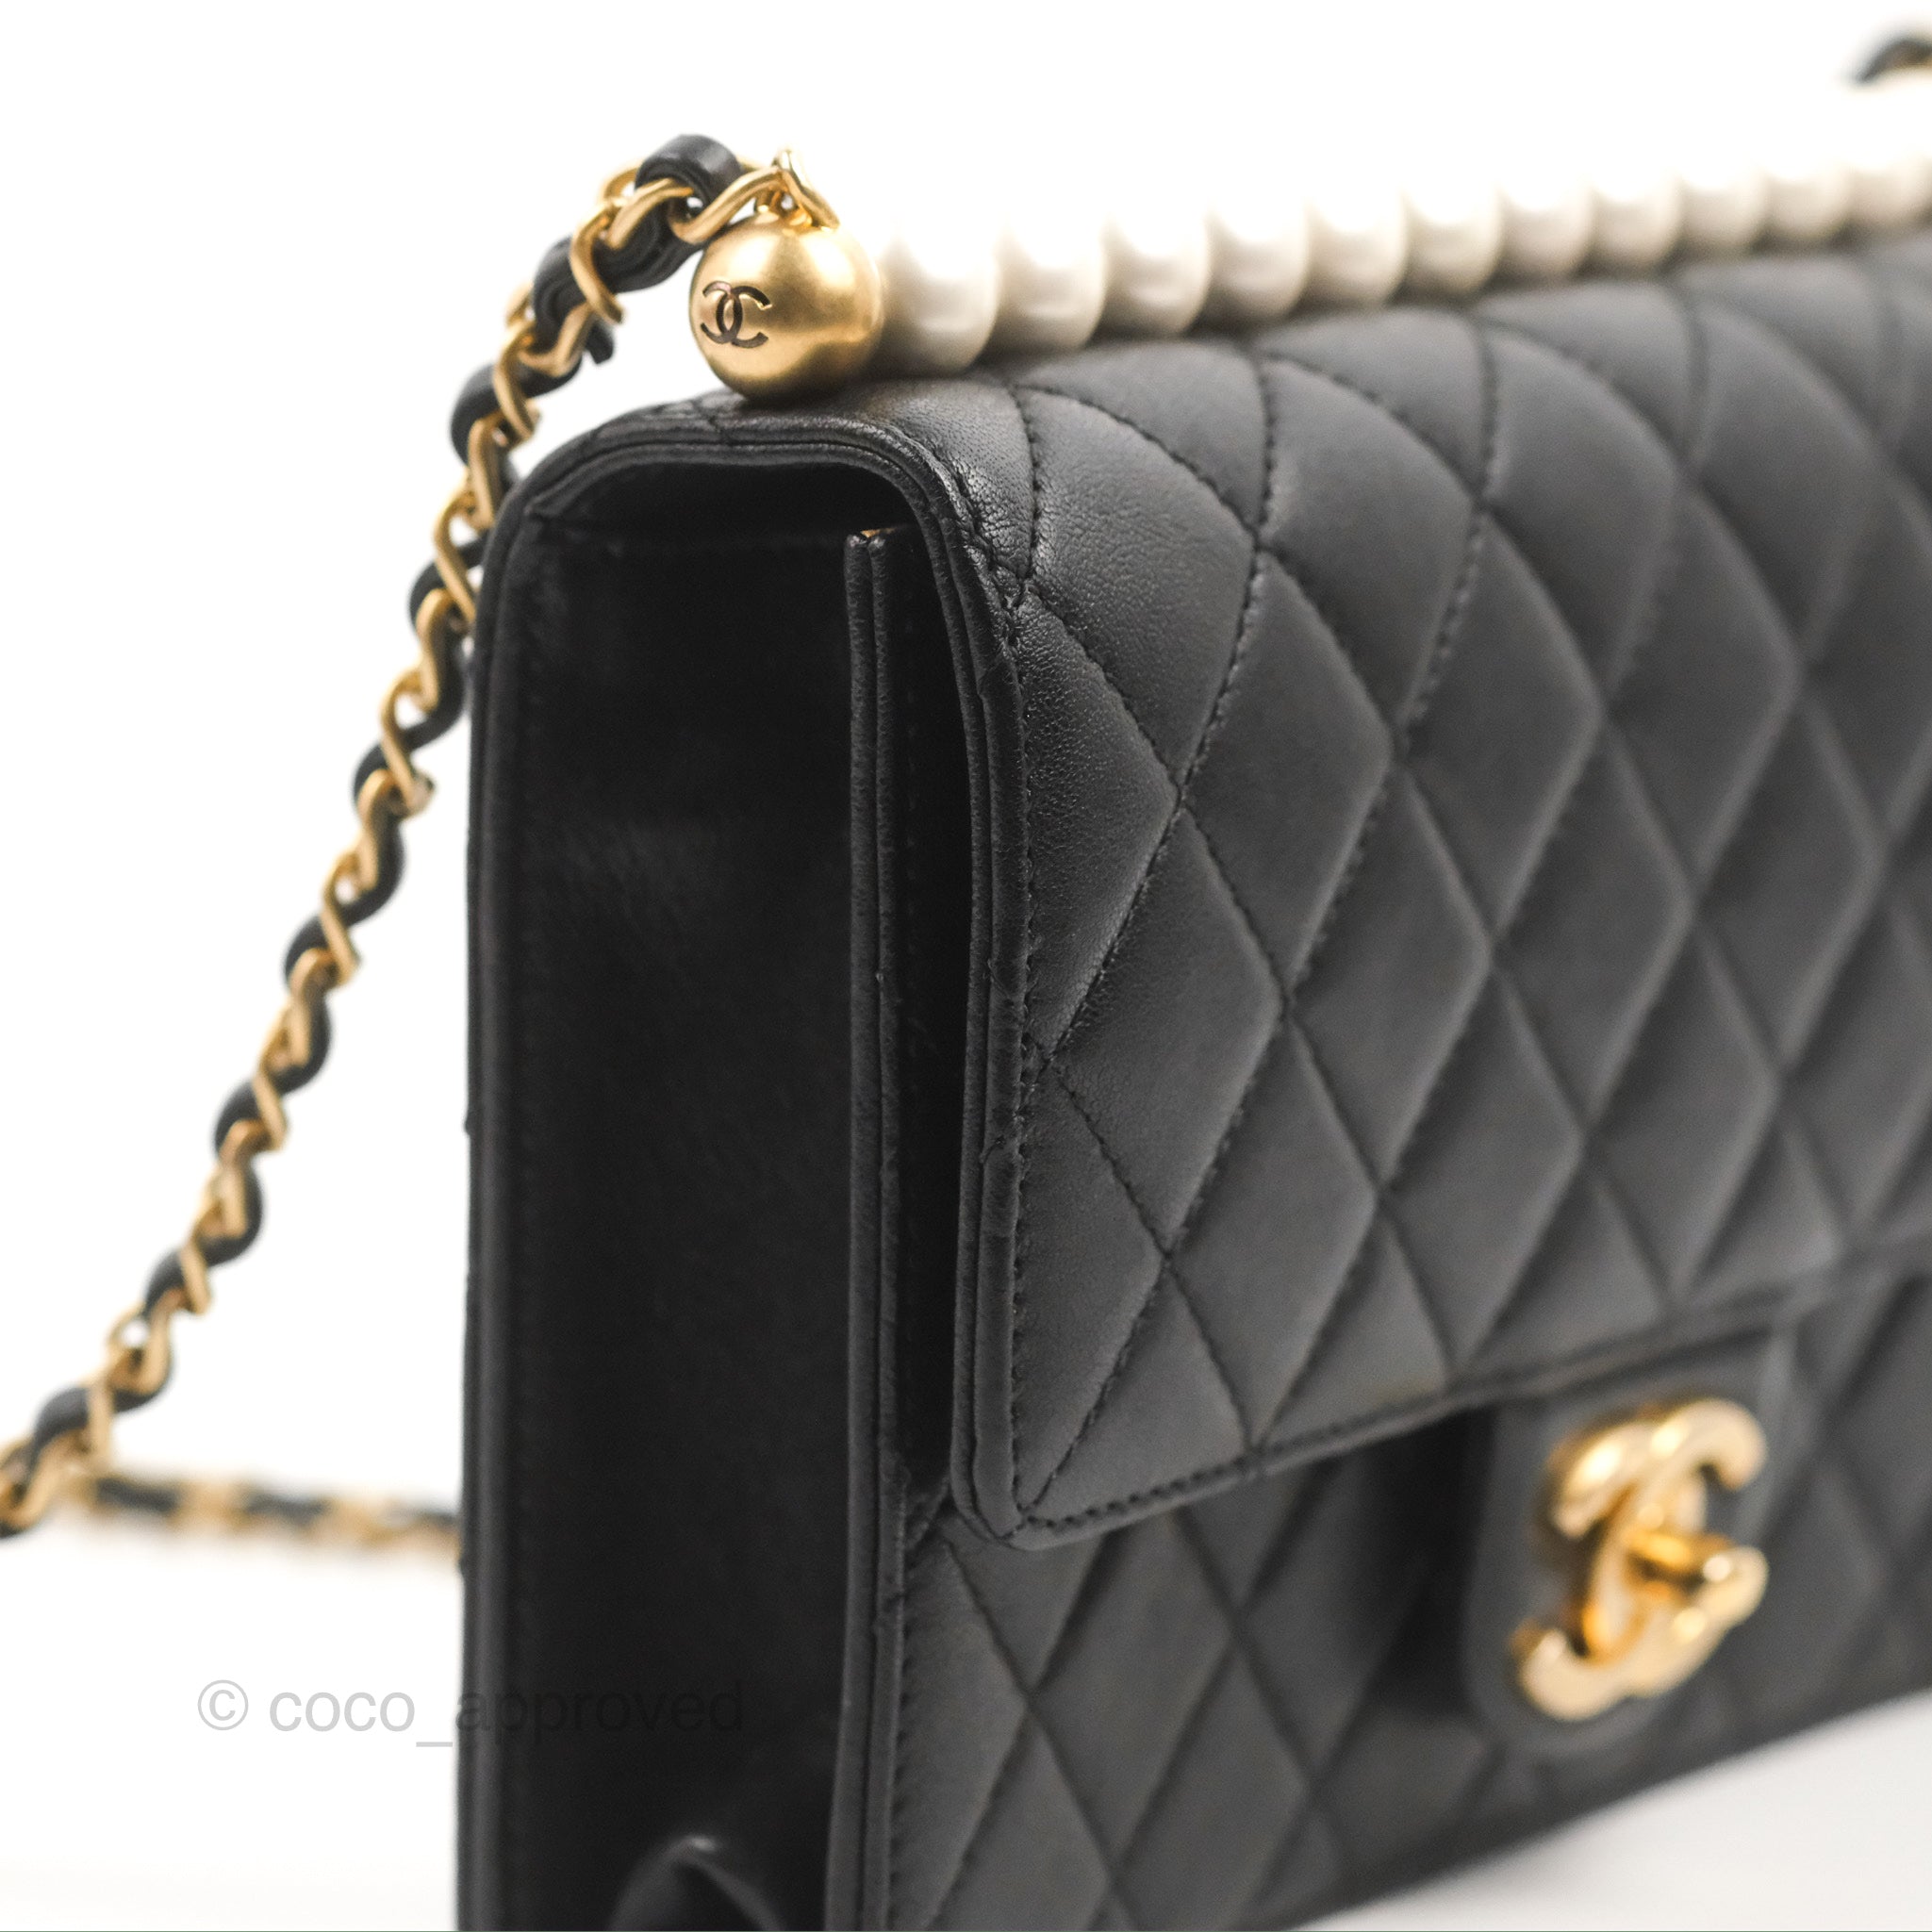 Chanel Chic Pearls Flap Bag Quilted Goatskin with Acrylic Beads Mini Gold  205760150